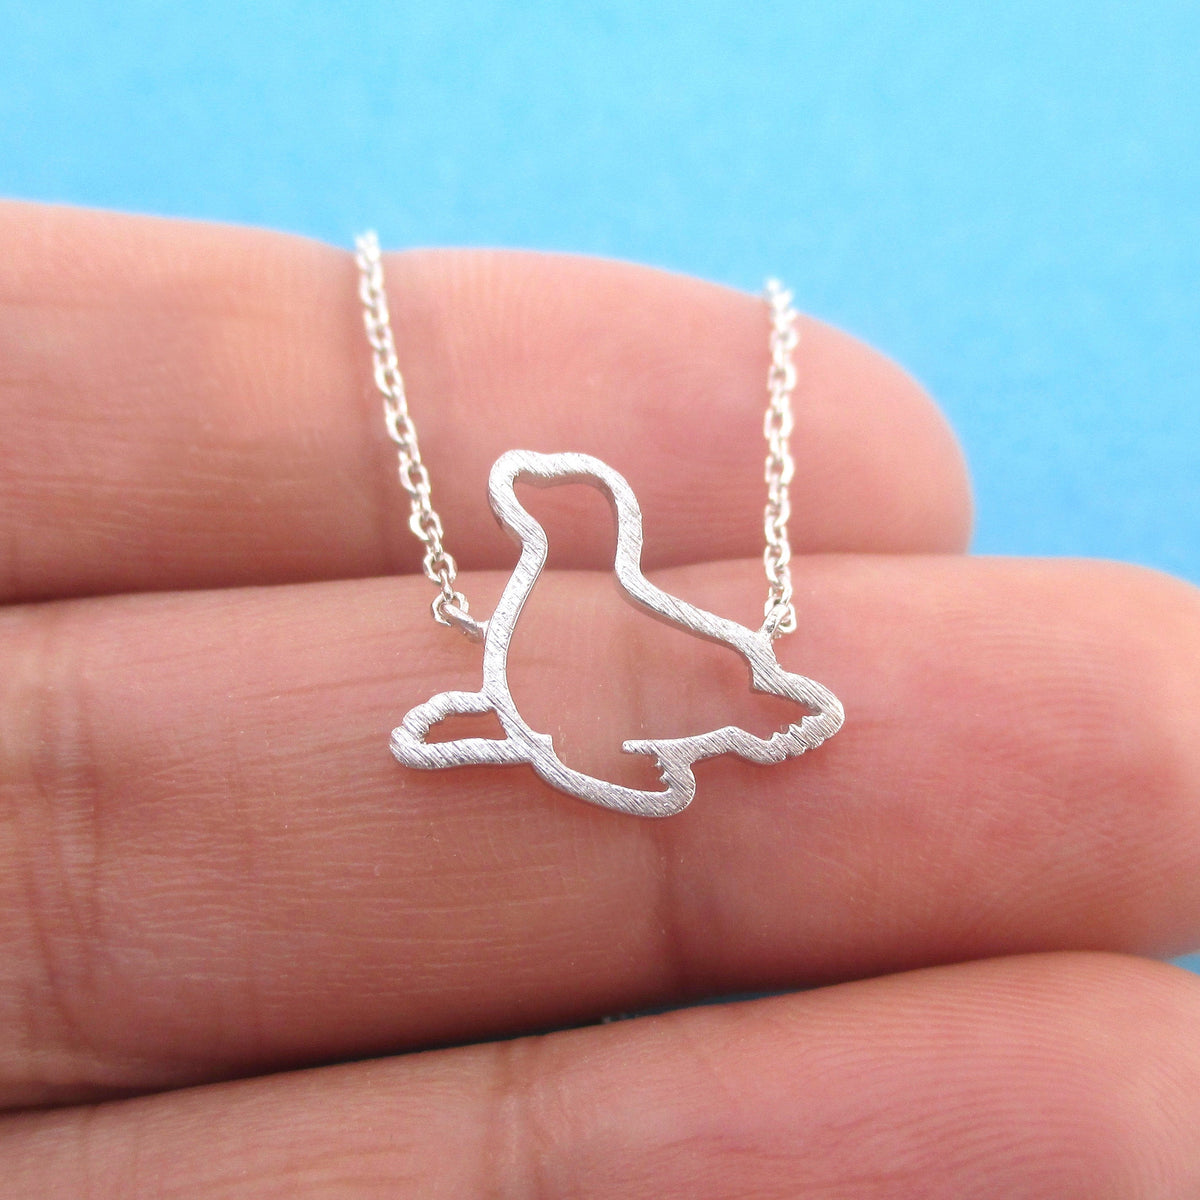 Details about   Seal Sea Lion Pendant Necklace or Keychain Made From a US Quarter 